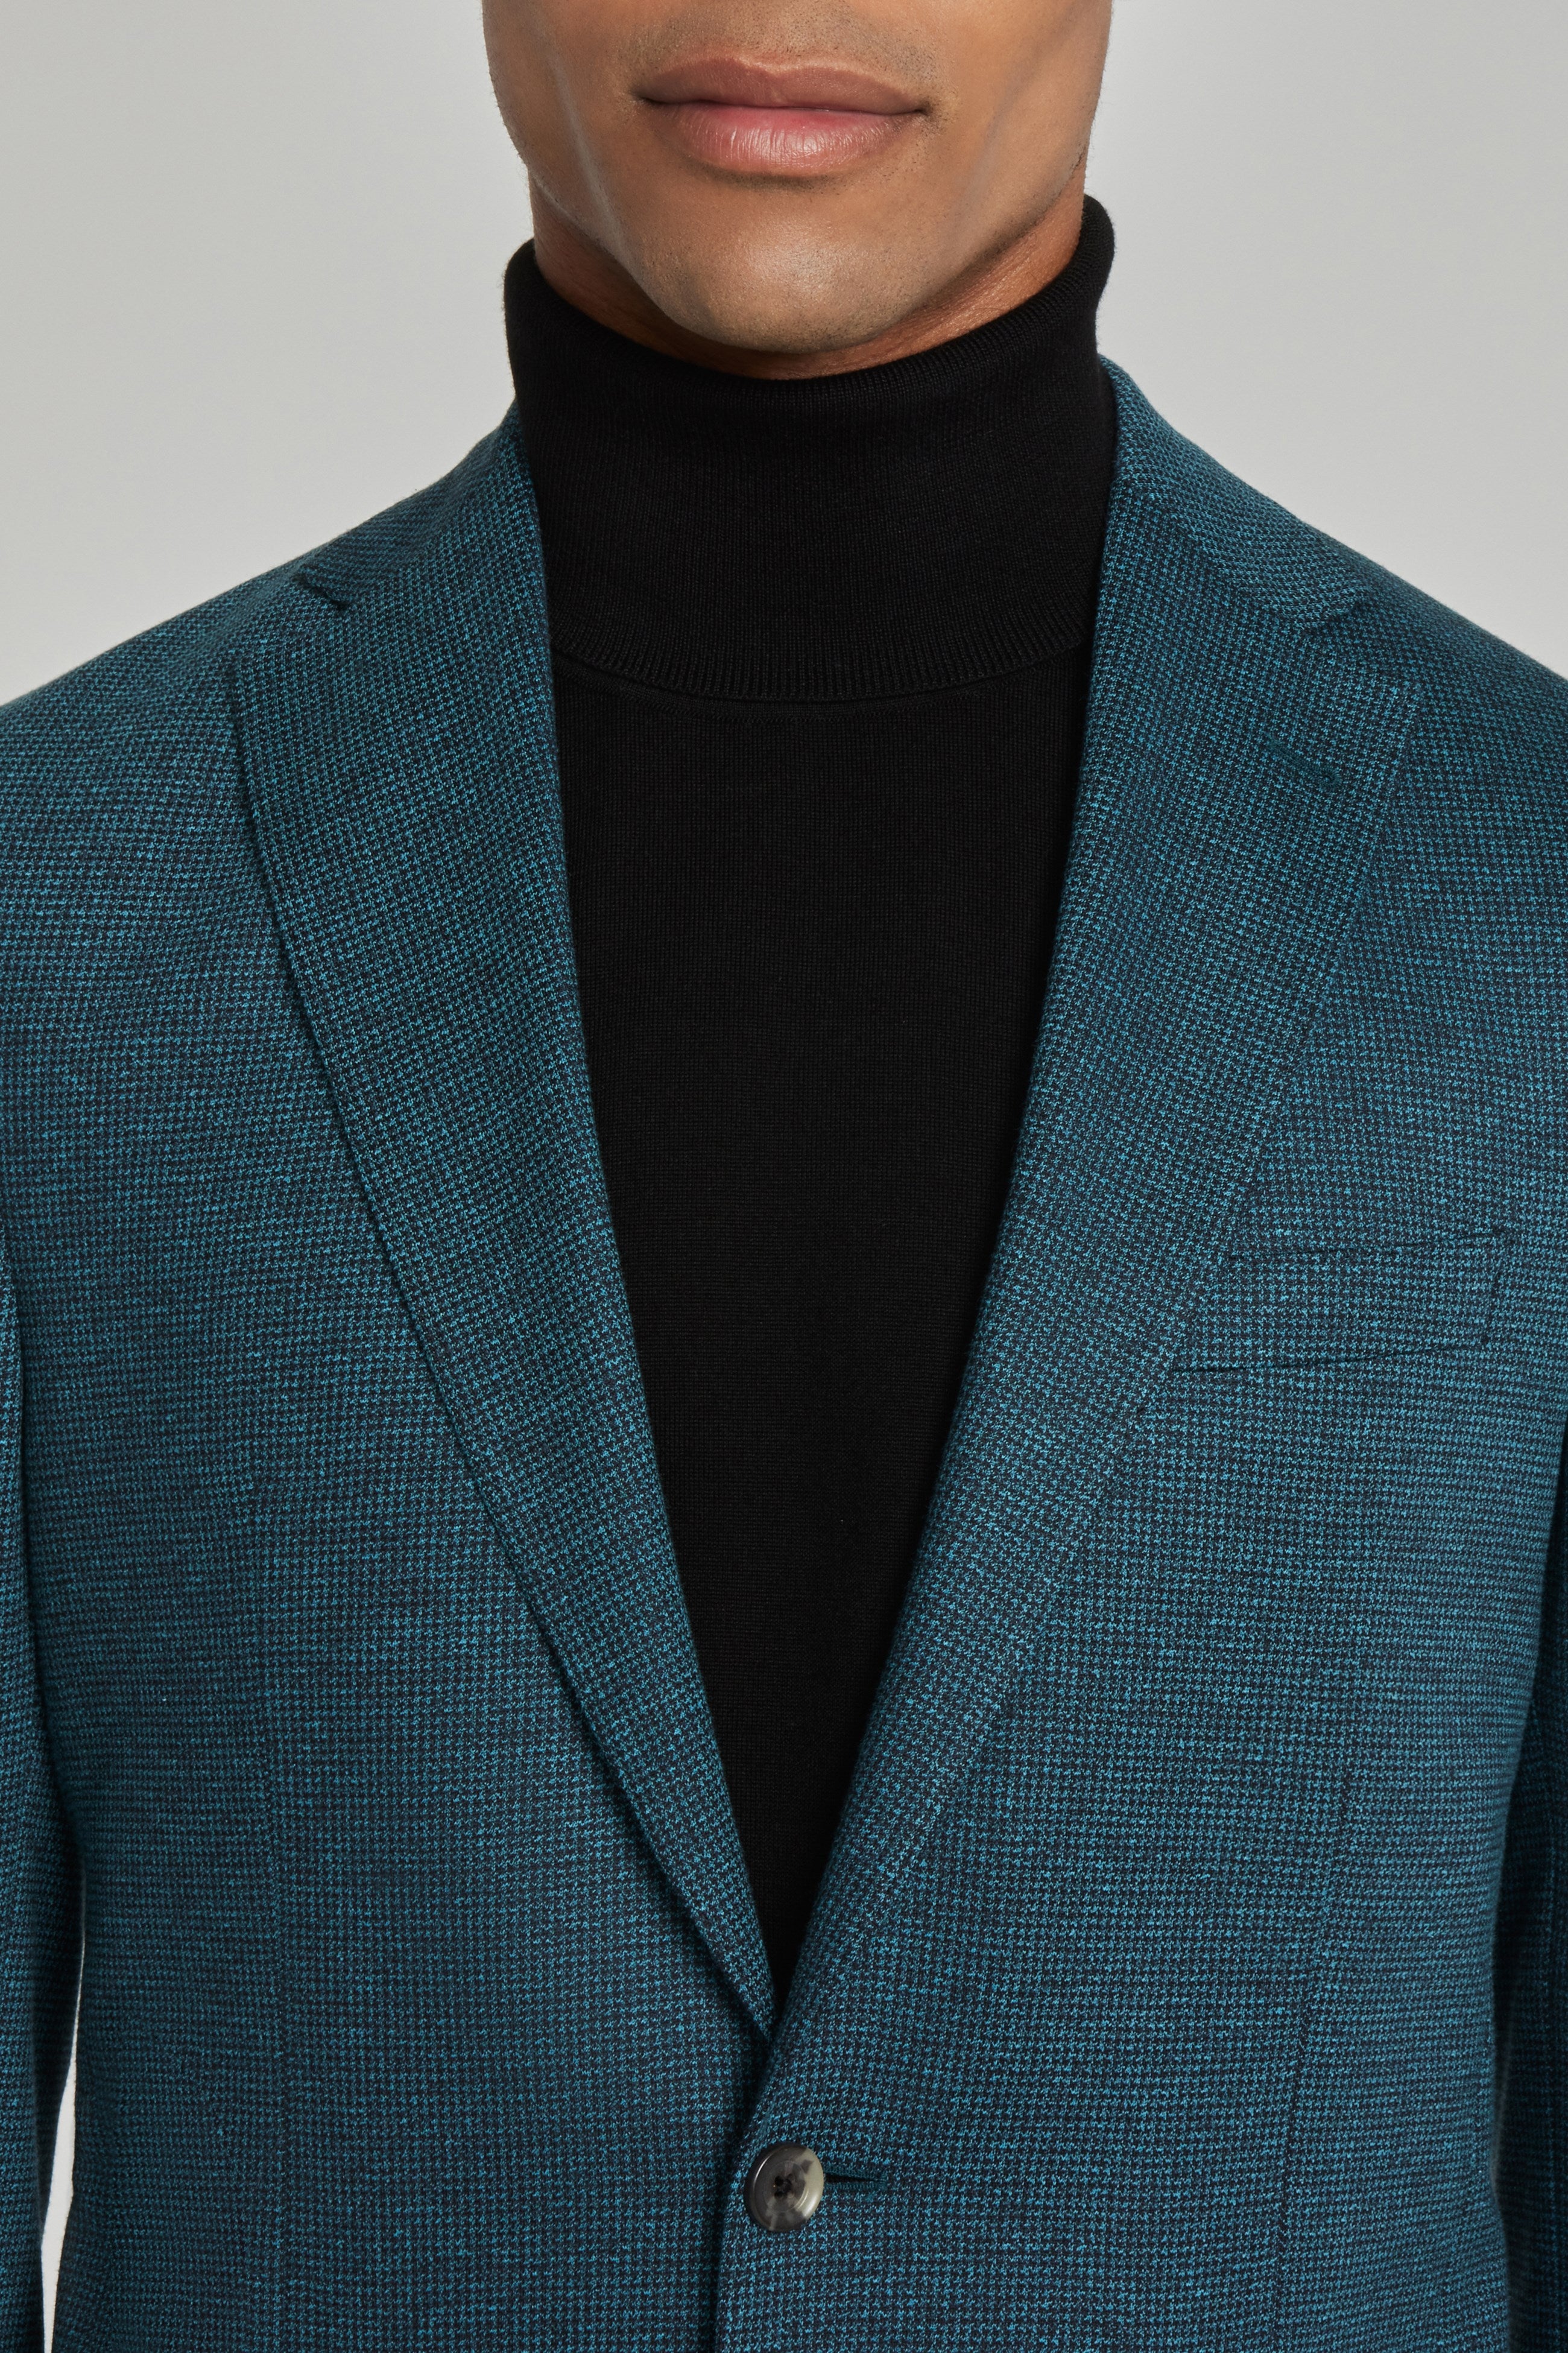 Alt view 1 Hampton Mini-Houndstooth Wool and Cotton Blazer in Teal